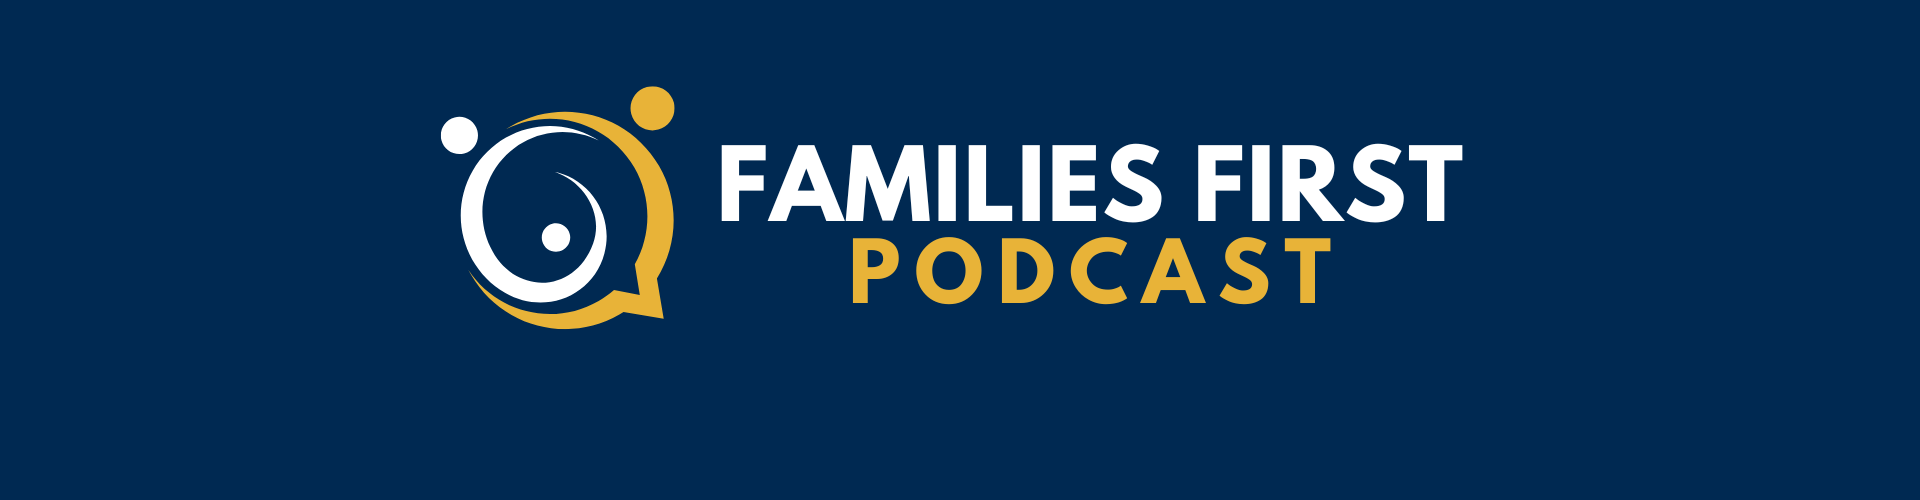 The Families First Podcast